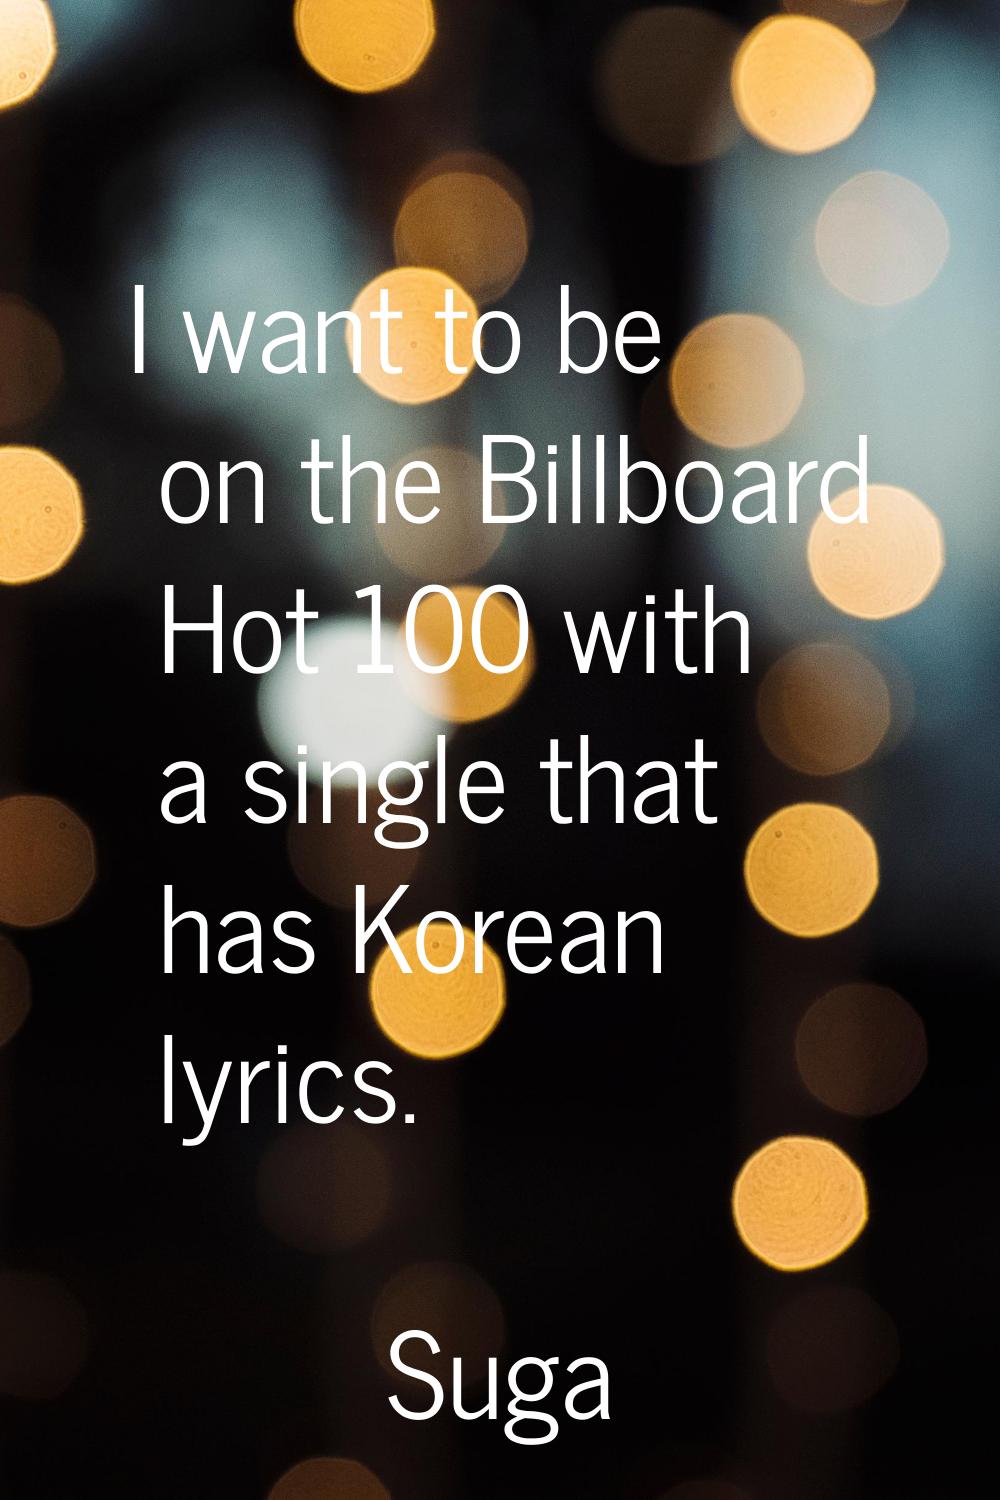 I want to be on the Billboard Hot 100 with a single that has Korean lyrics.